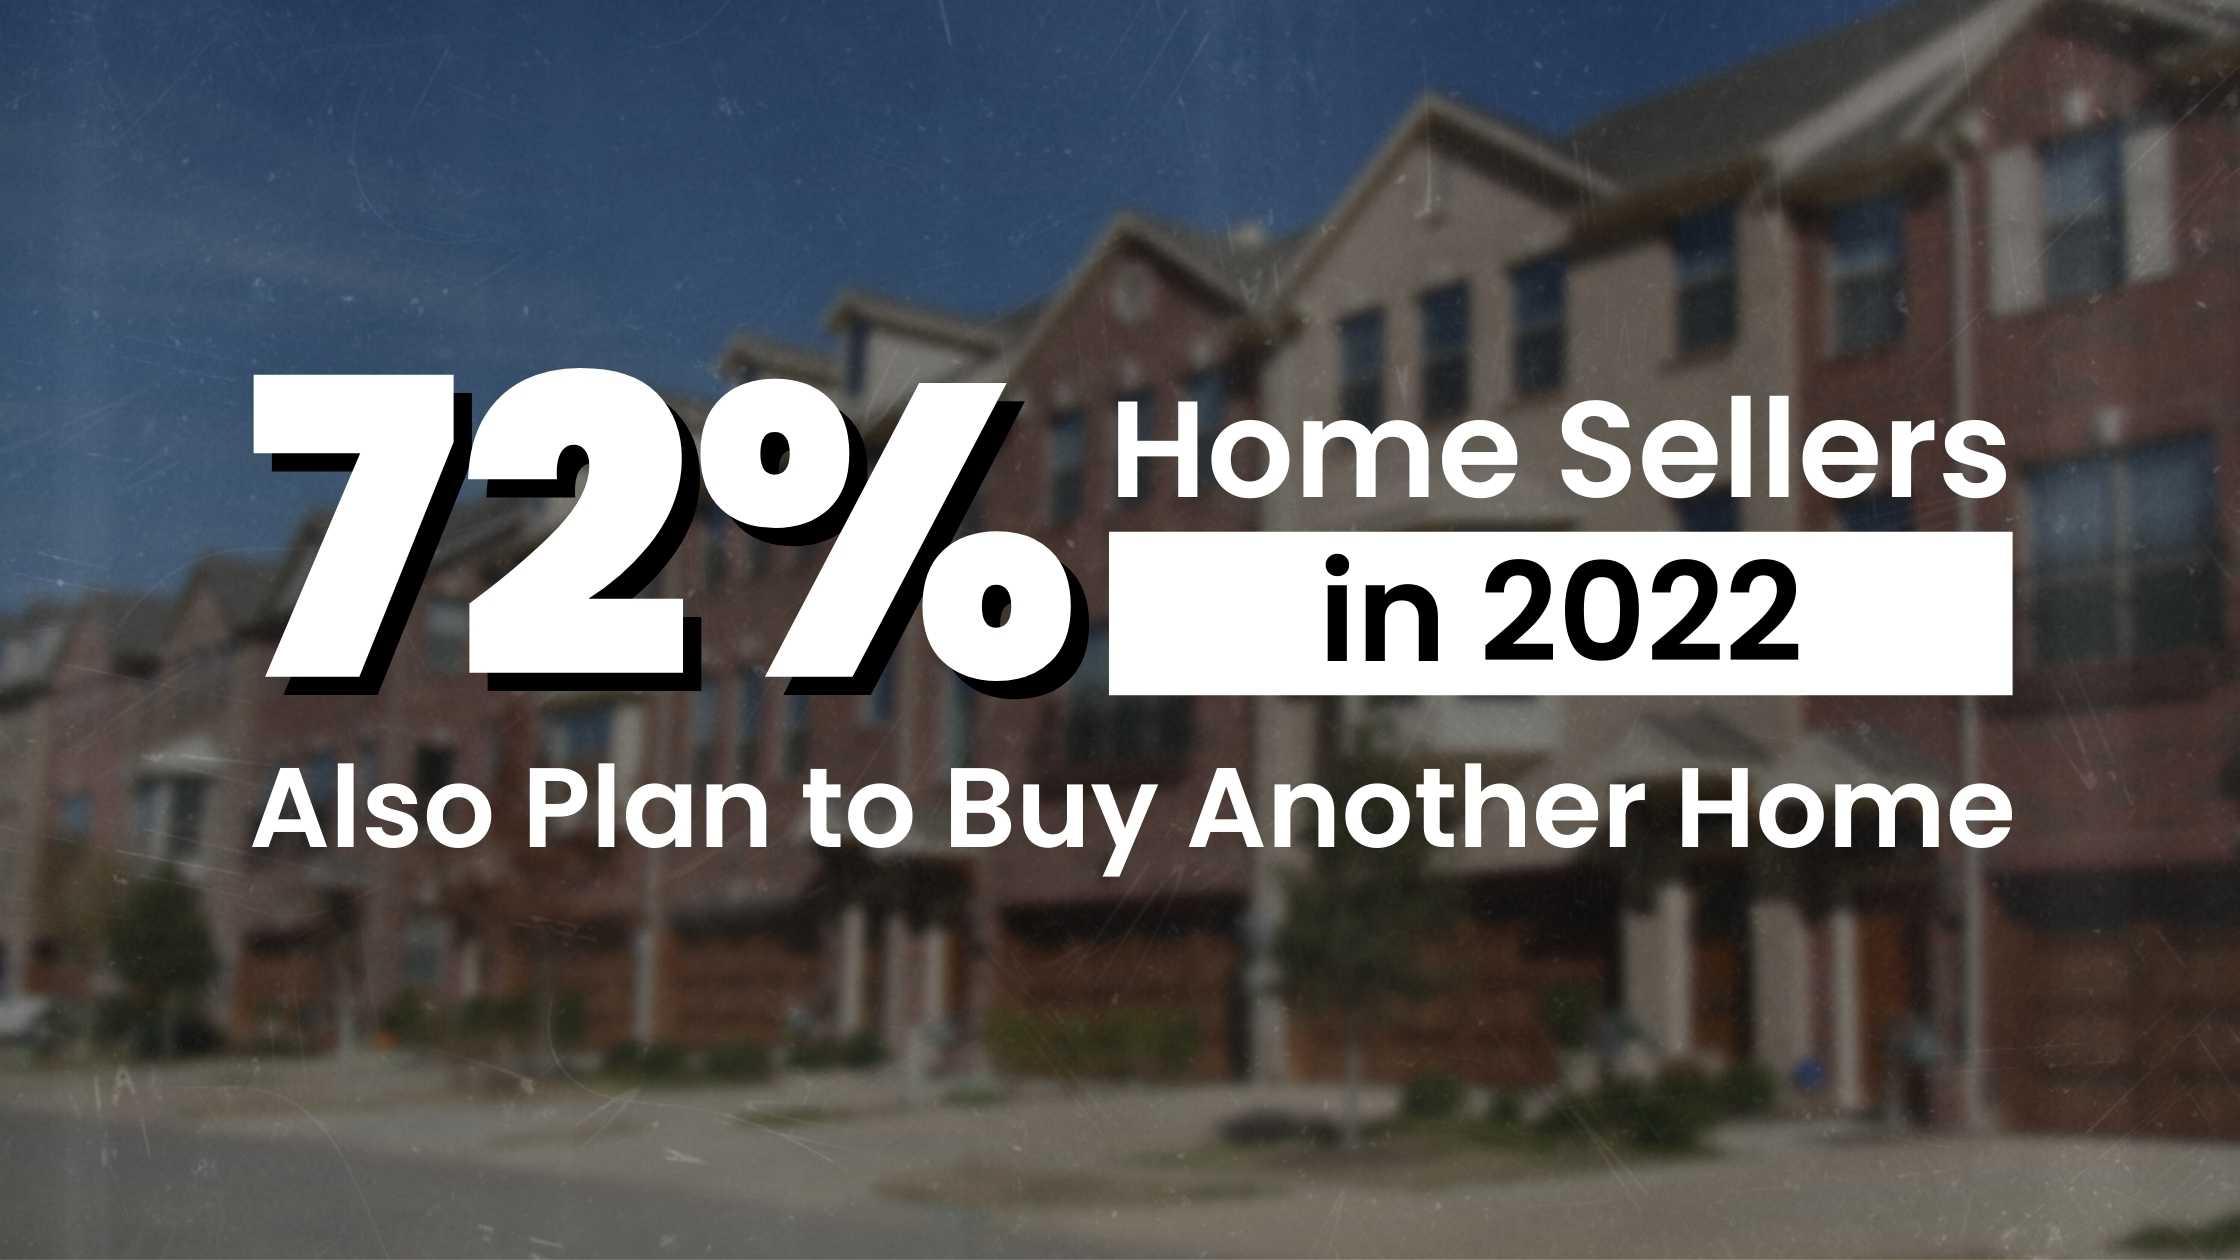 72% of Home Sellers in 2022 Also Plan to Buy Another Home in Charleston, SC